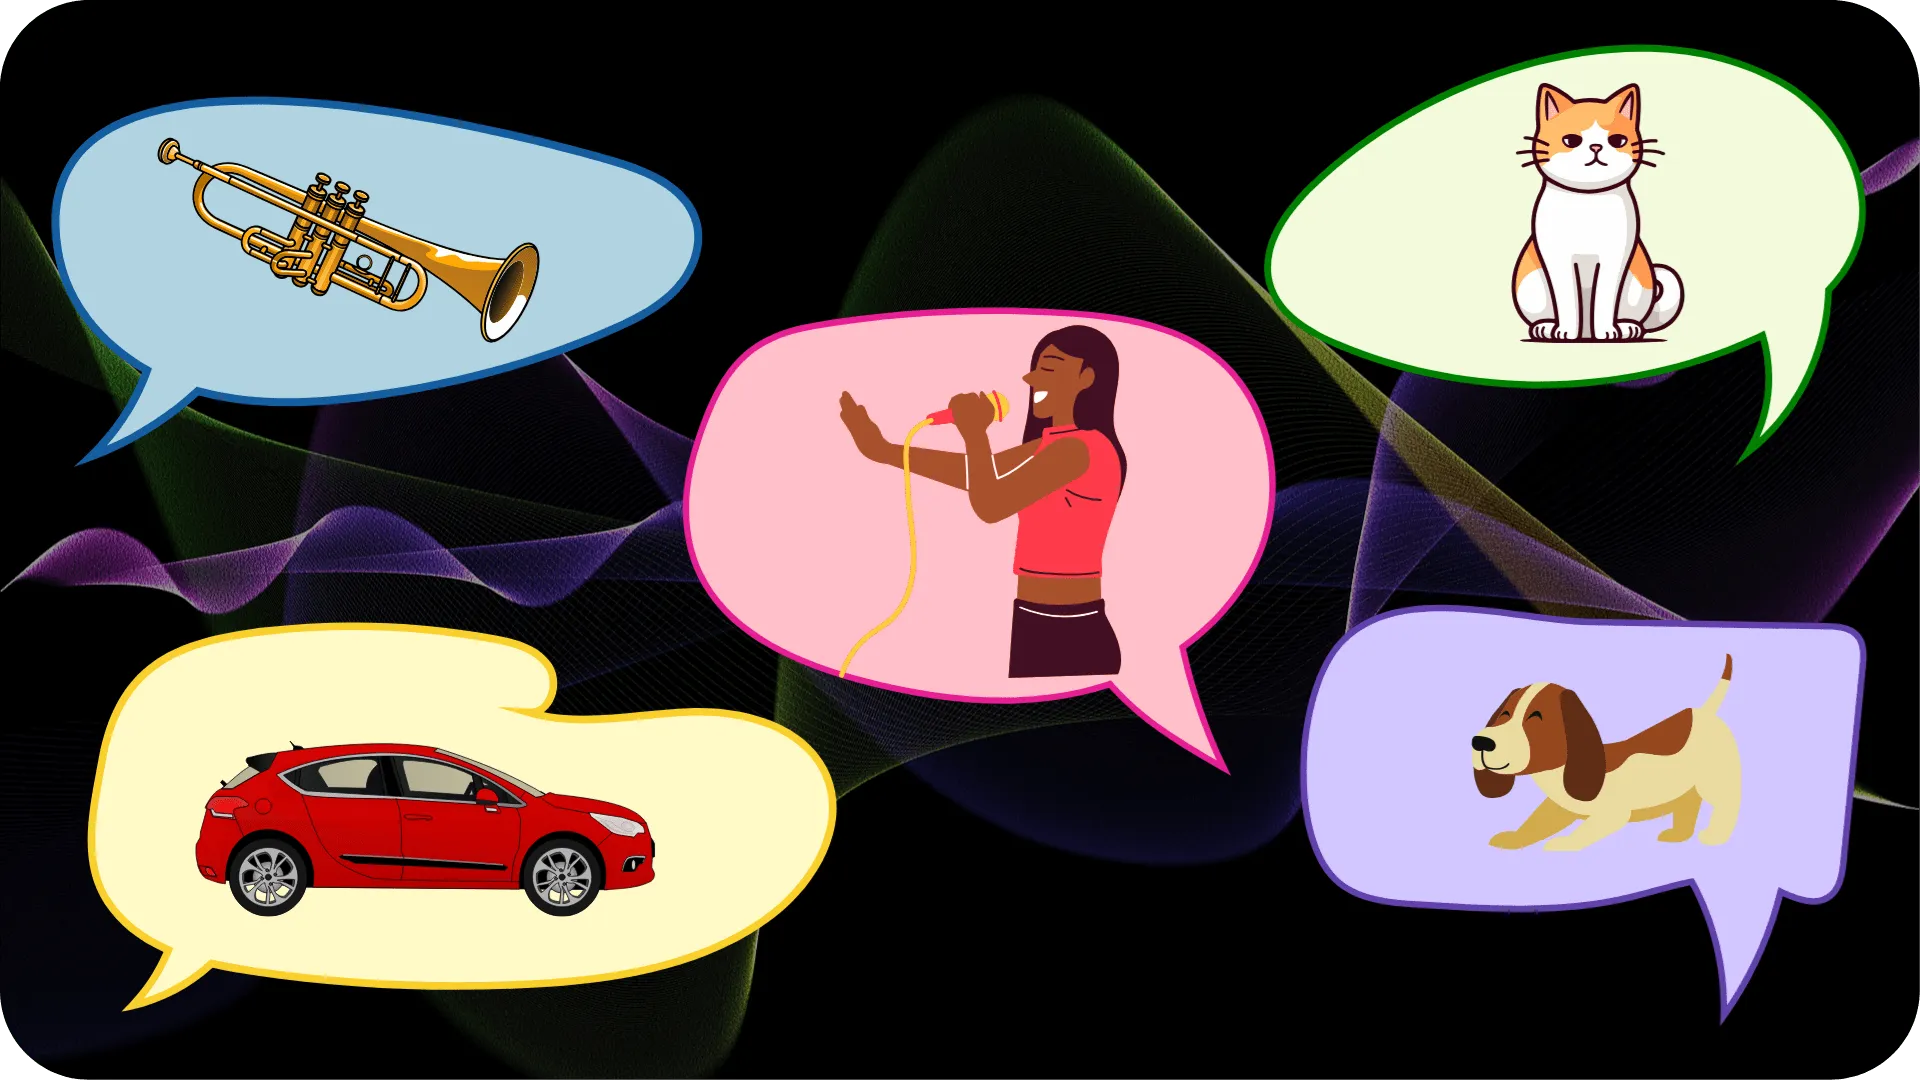 Different coloured speech bubbles with different things that make sound, including a woman singing, a cat, a dog, a trumpet and a car on a subtle dark background showing sound waves.